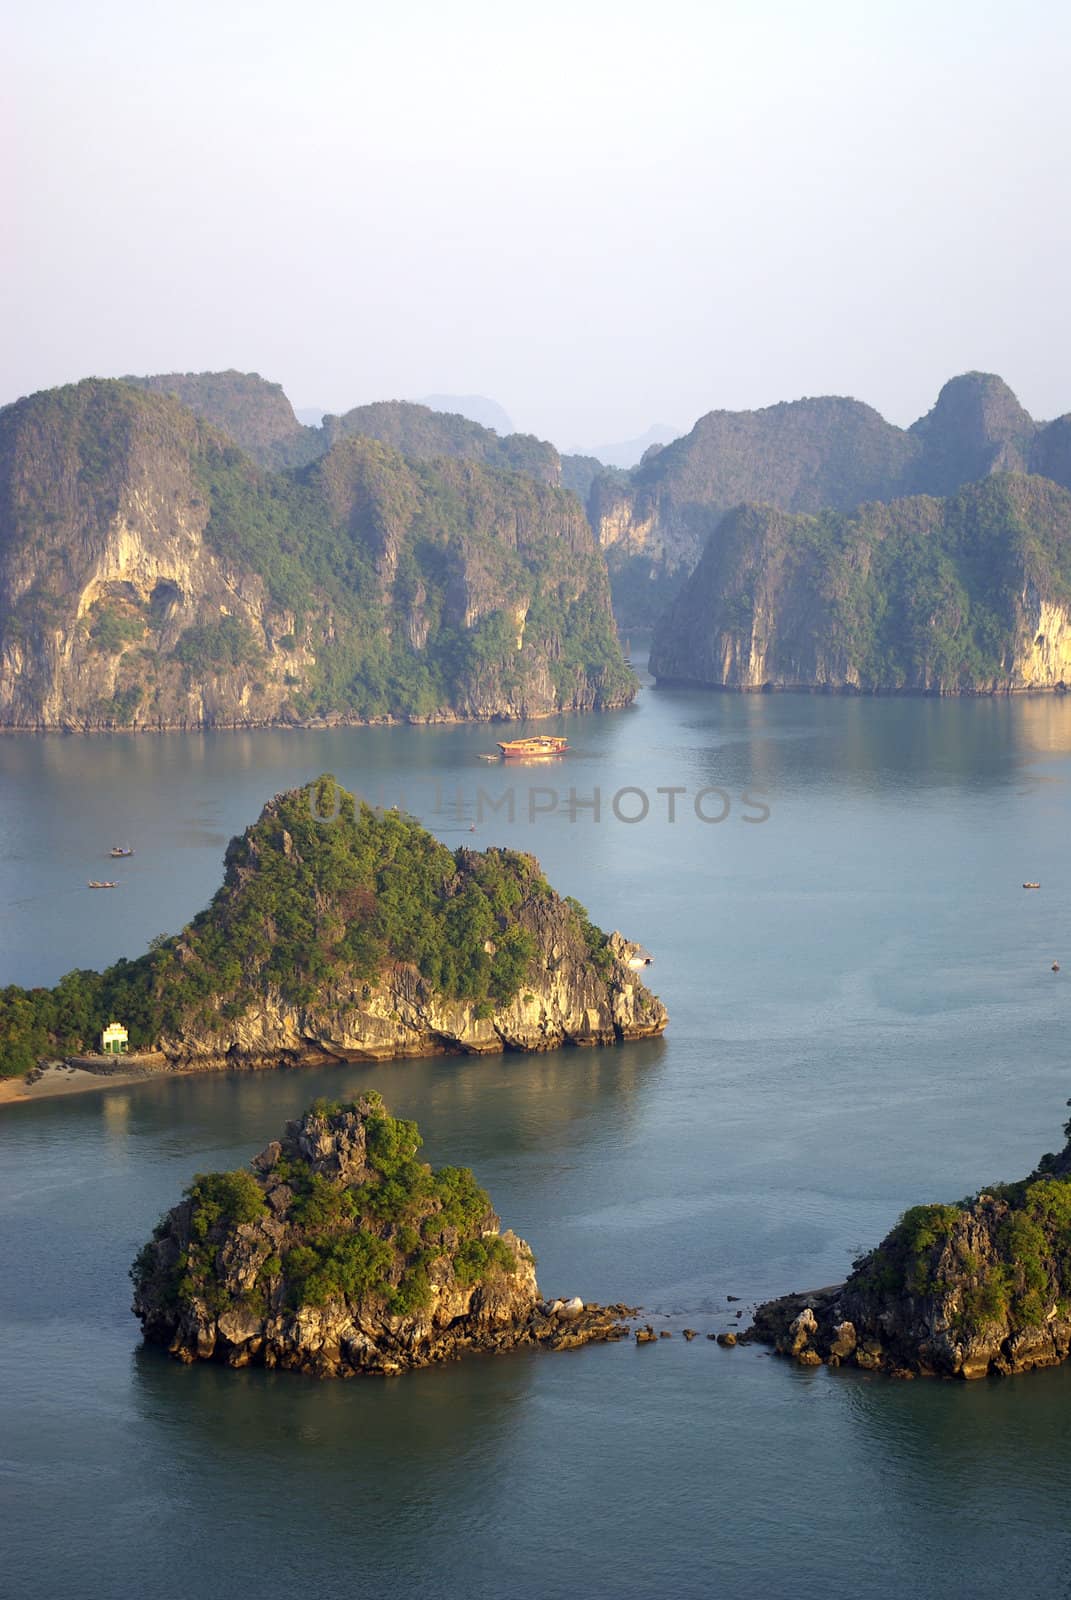 Beginning of sunset in Halong bay by shkyo30